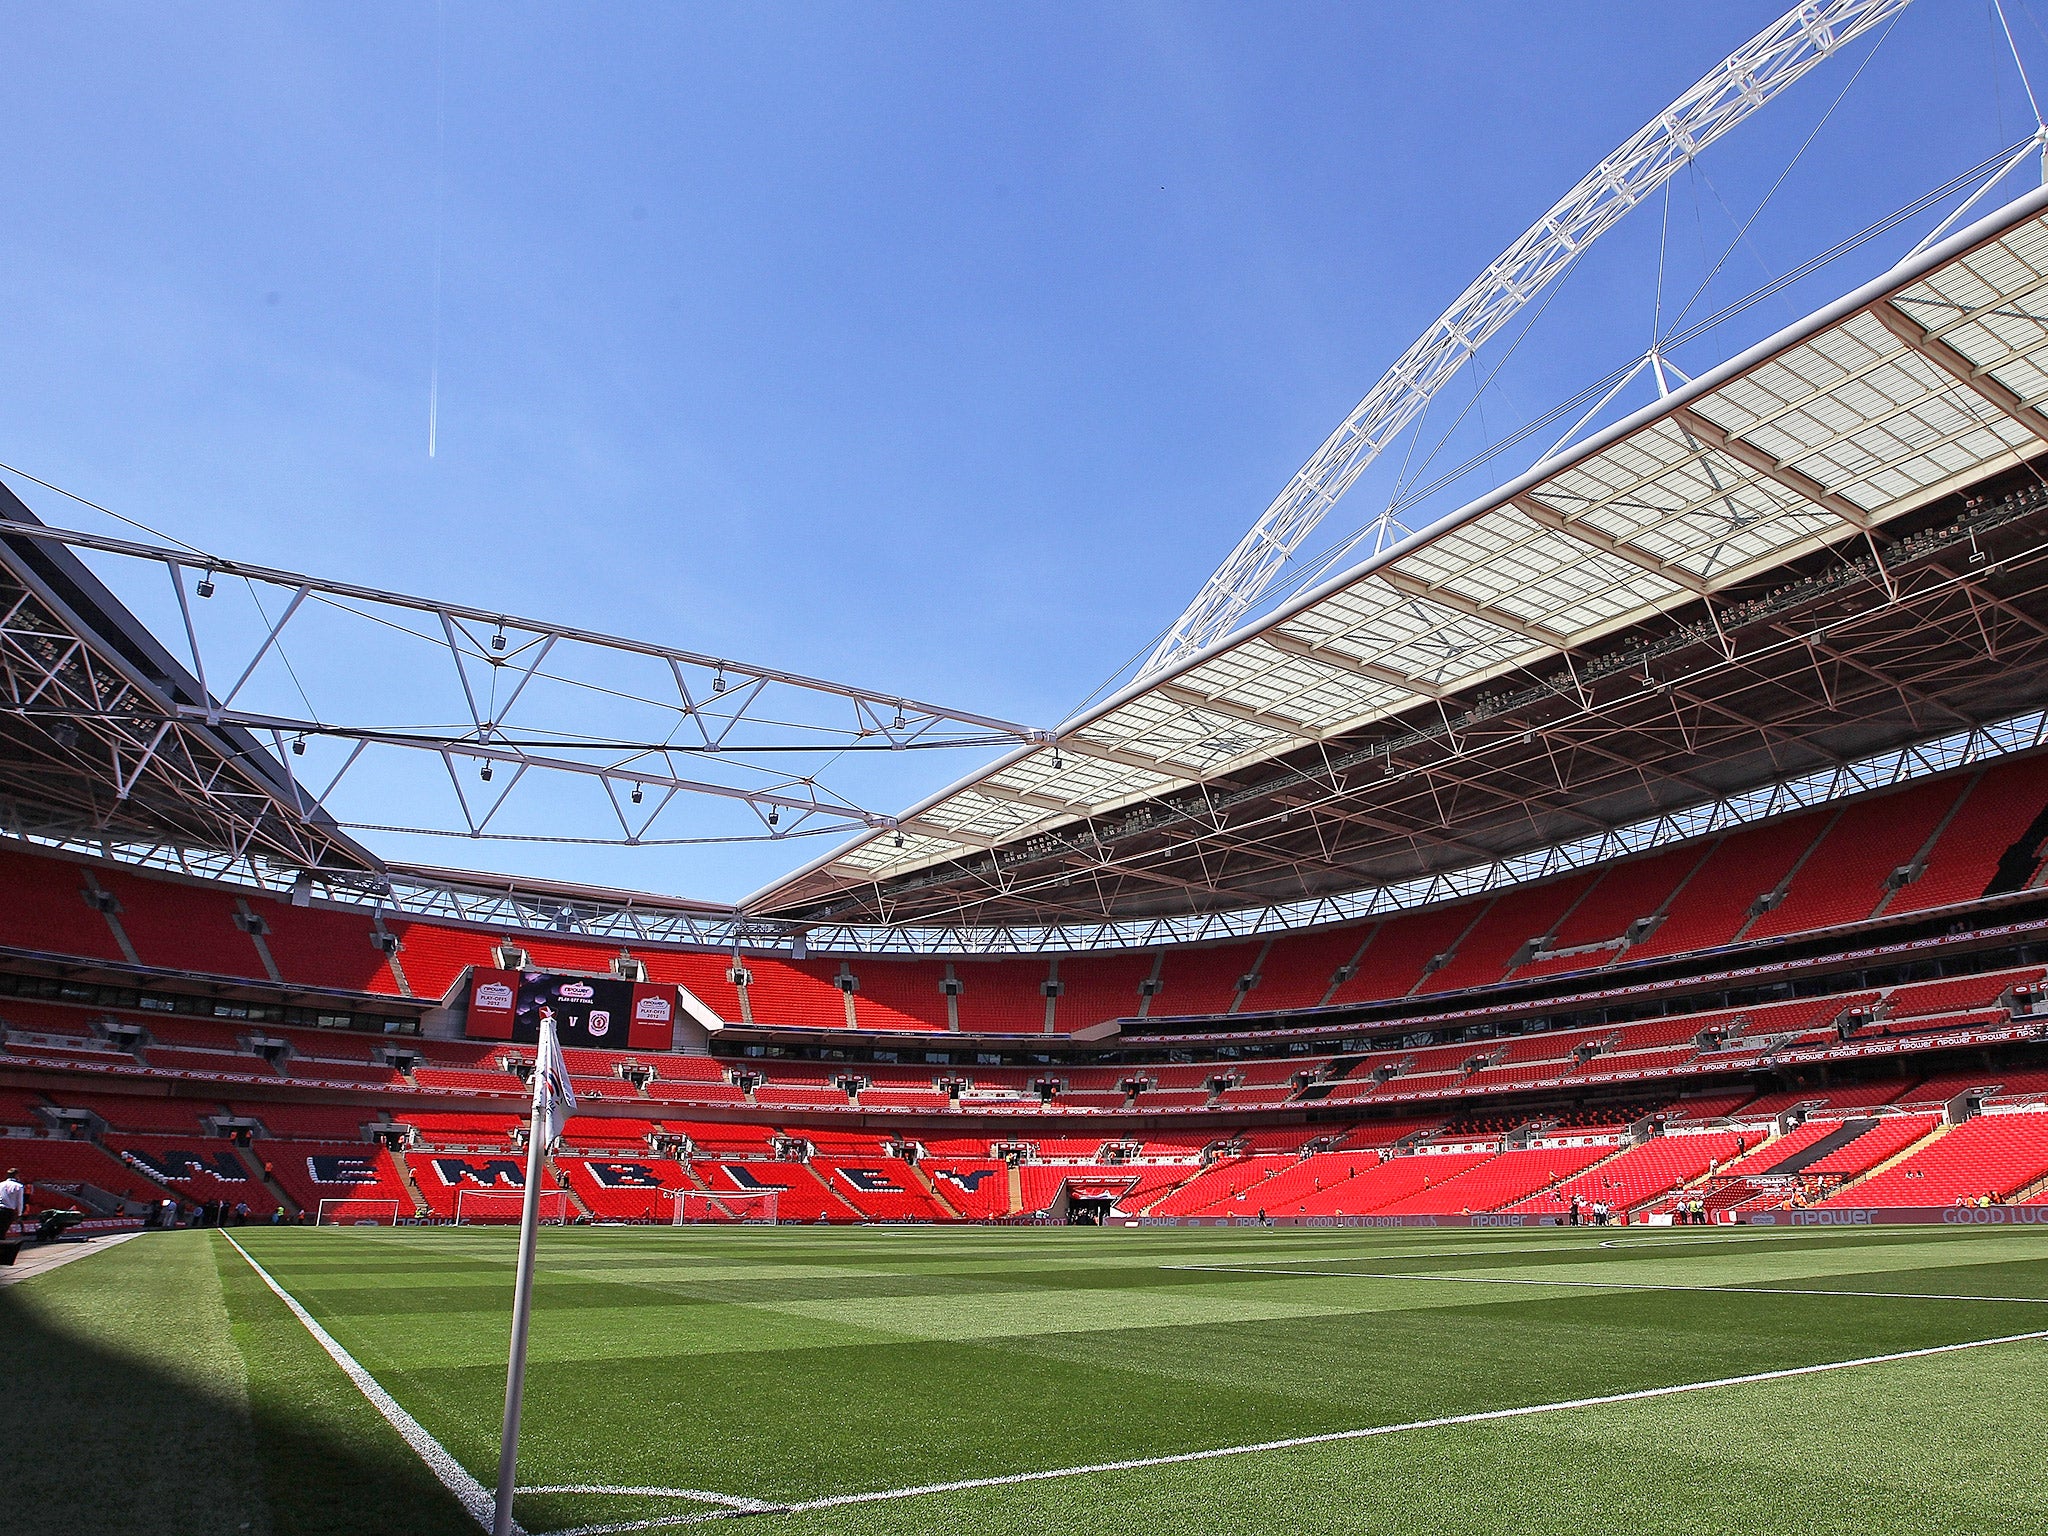 There will be a refinancing of the Wembley debt, FA chief executive Martin Glenn has said